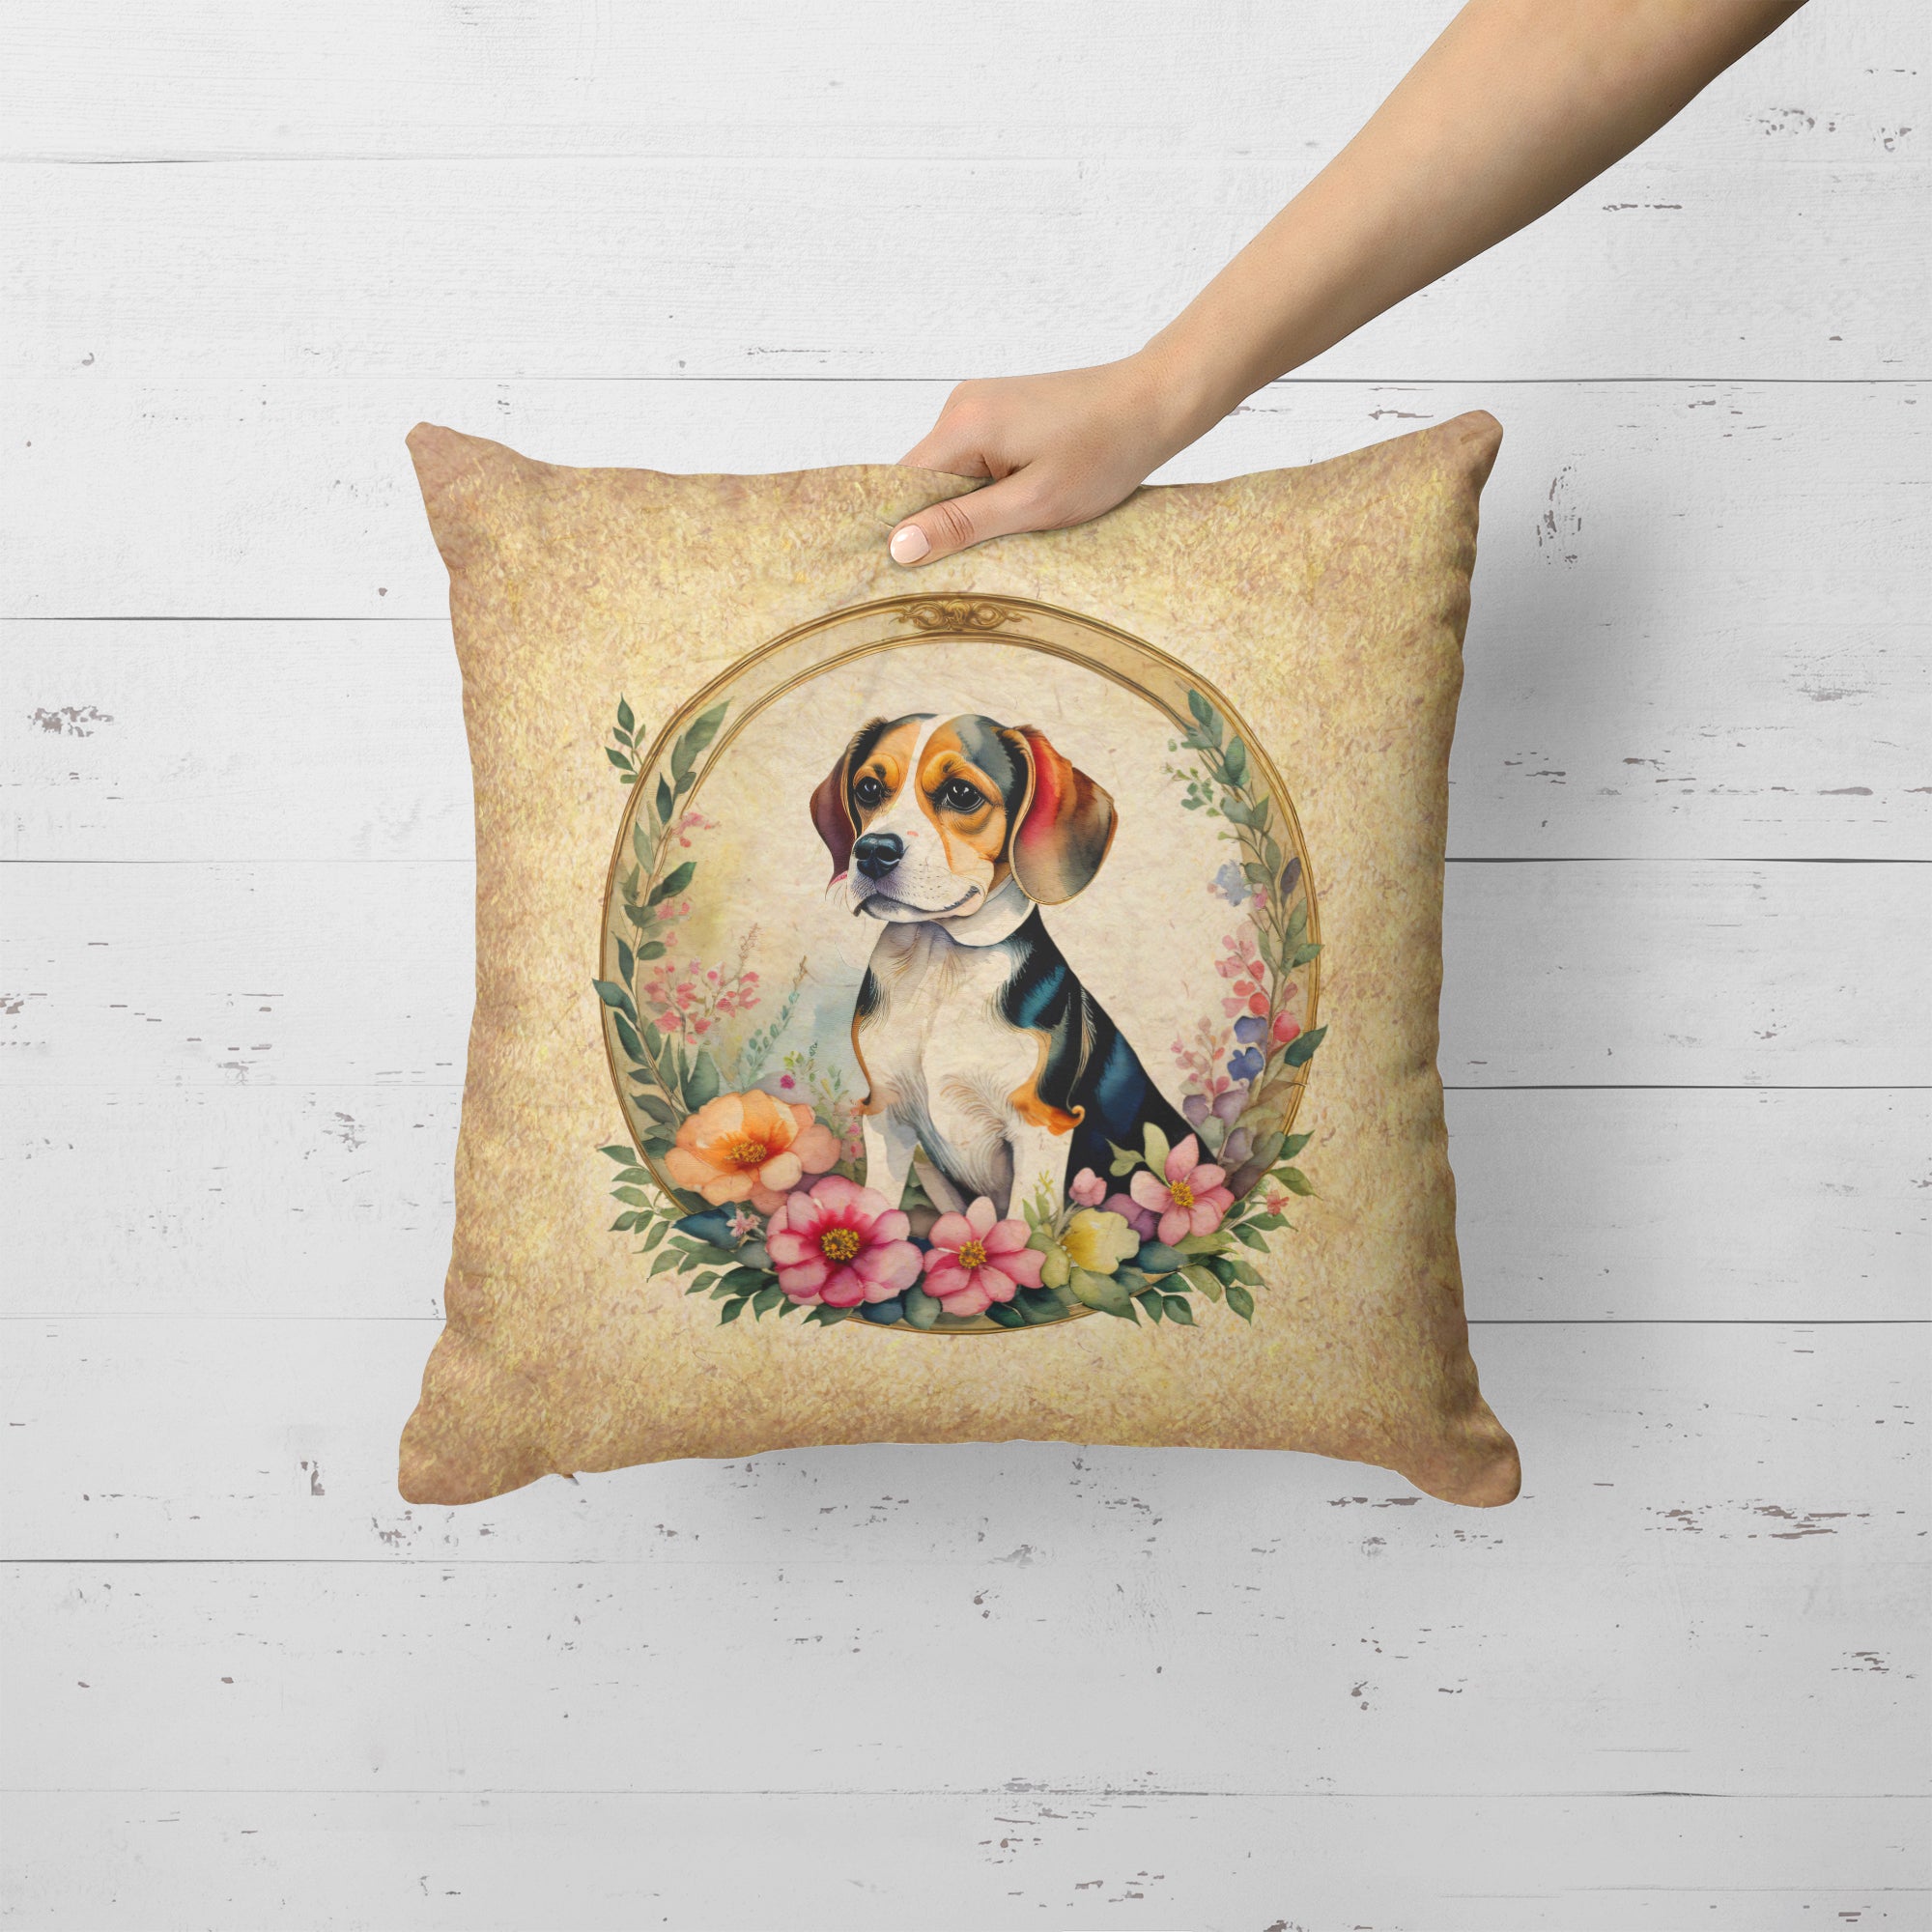 Buy this Beagle and Flowers Fabric Decorative Pillow